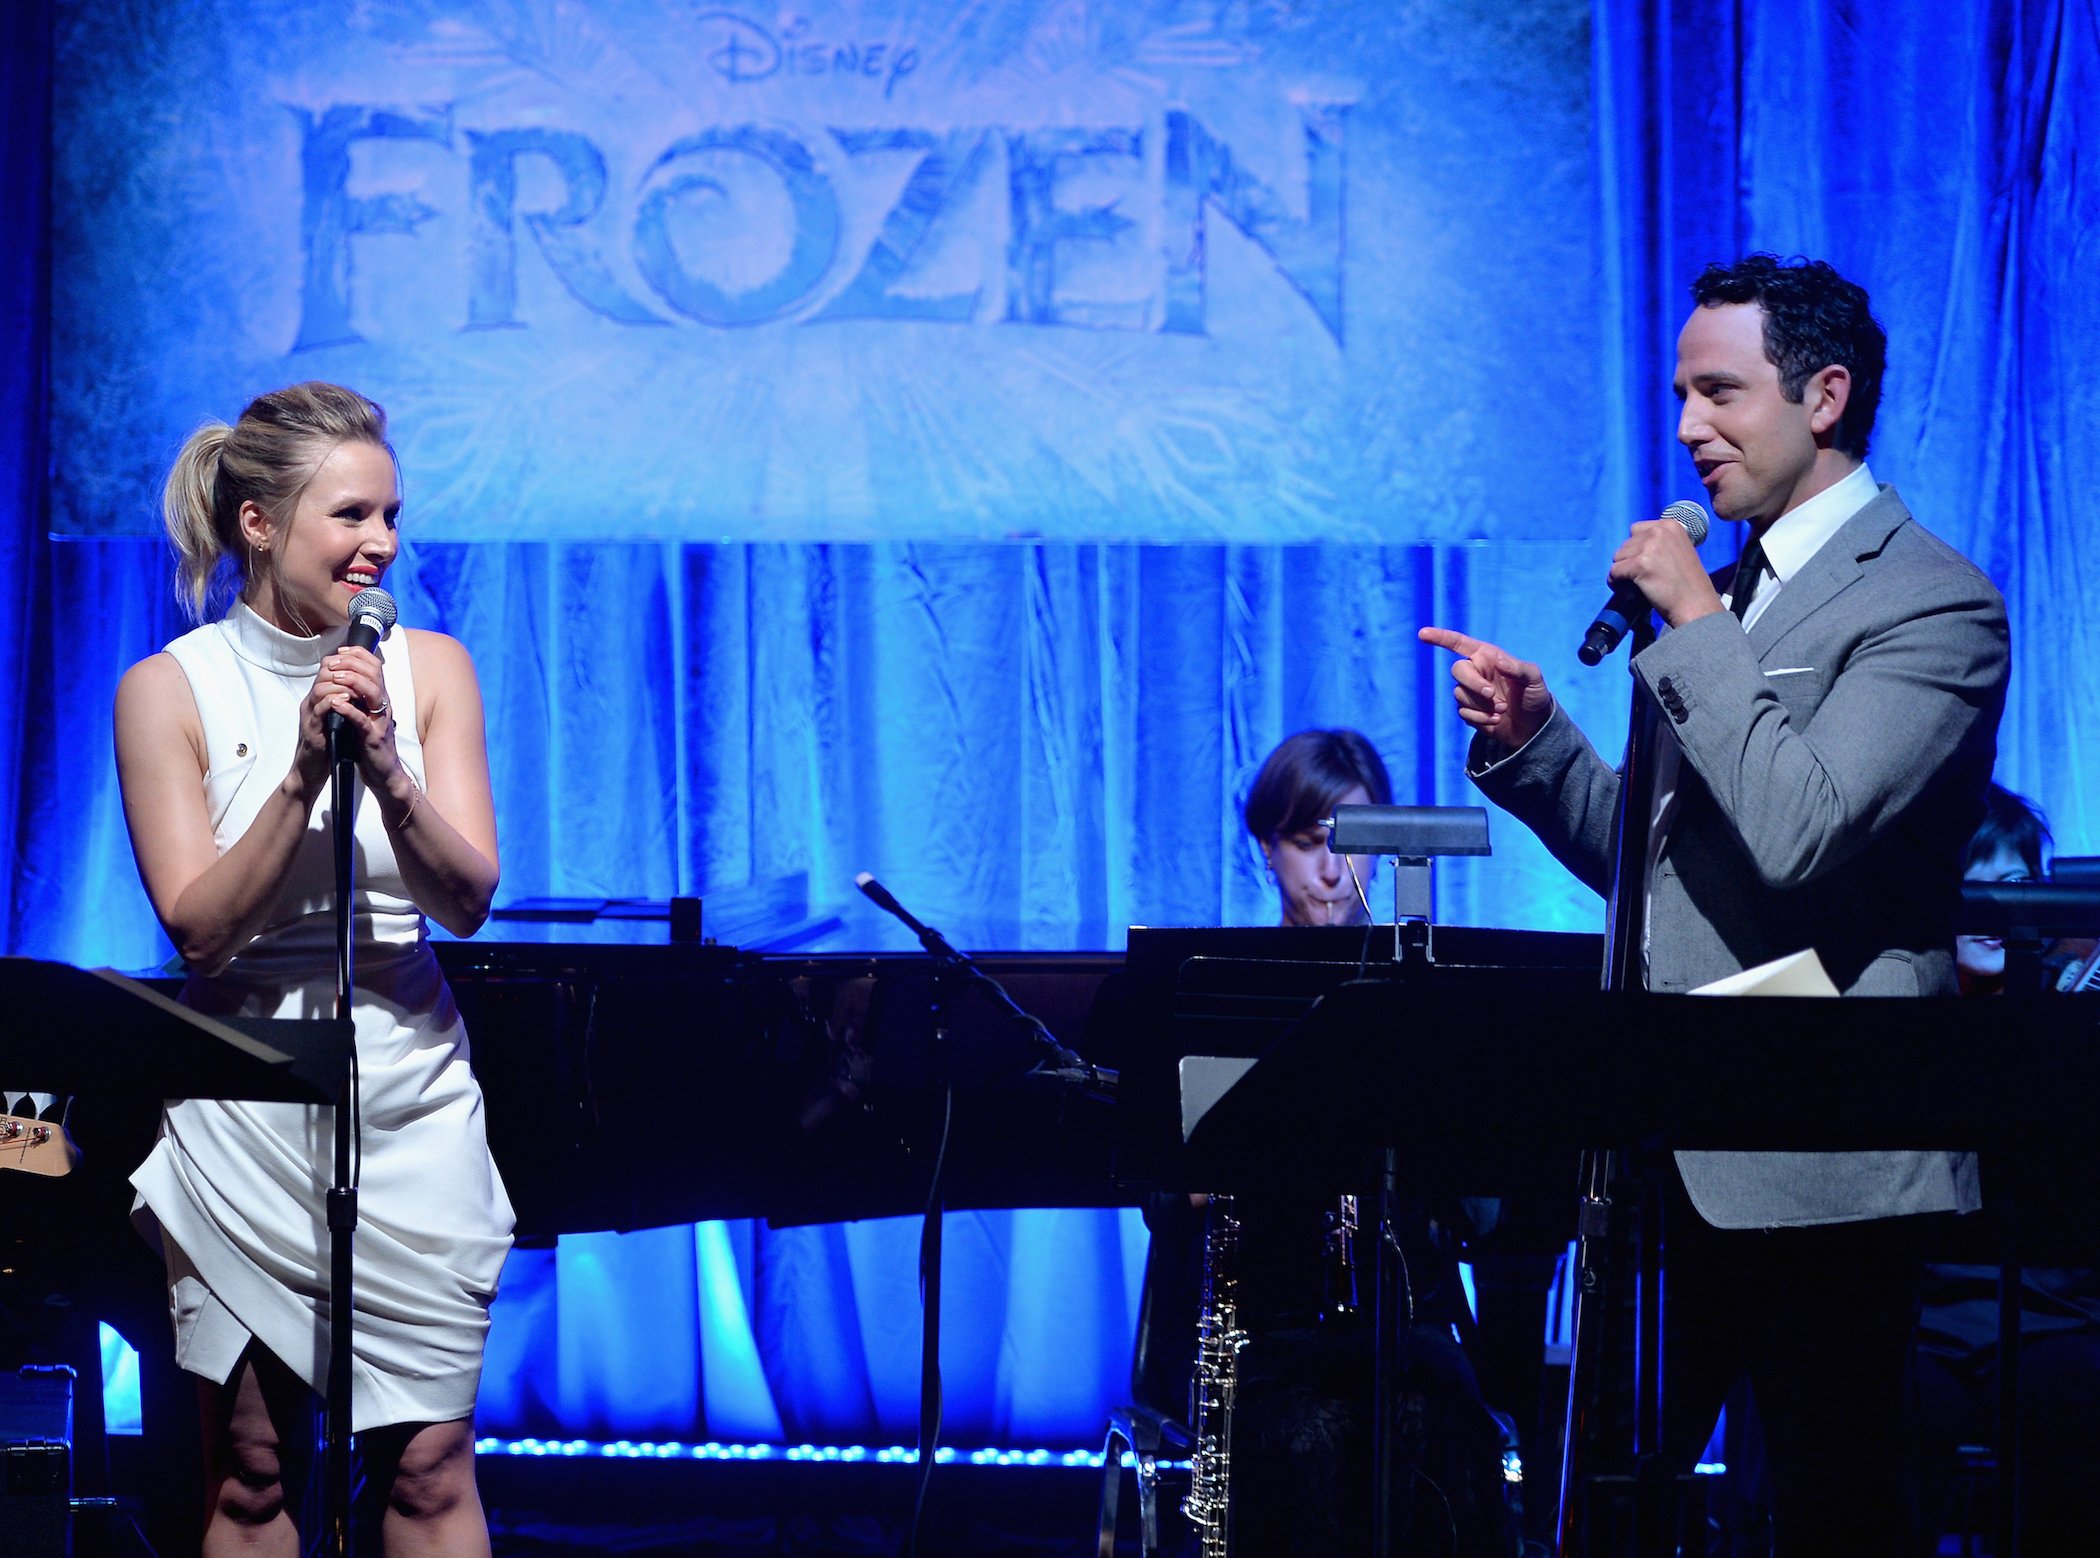 The music of Disney's 'Frozen' was celebrated with live performances from Kristen Bell (voice of Anna), Idina Menzel (voice of Elsa), Josh Gad (voice of Olaf), and Santino Fontana (voice of Hans)